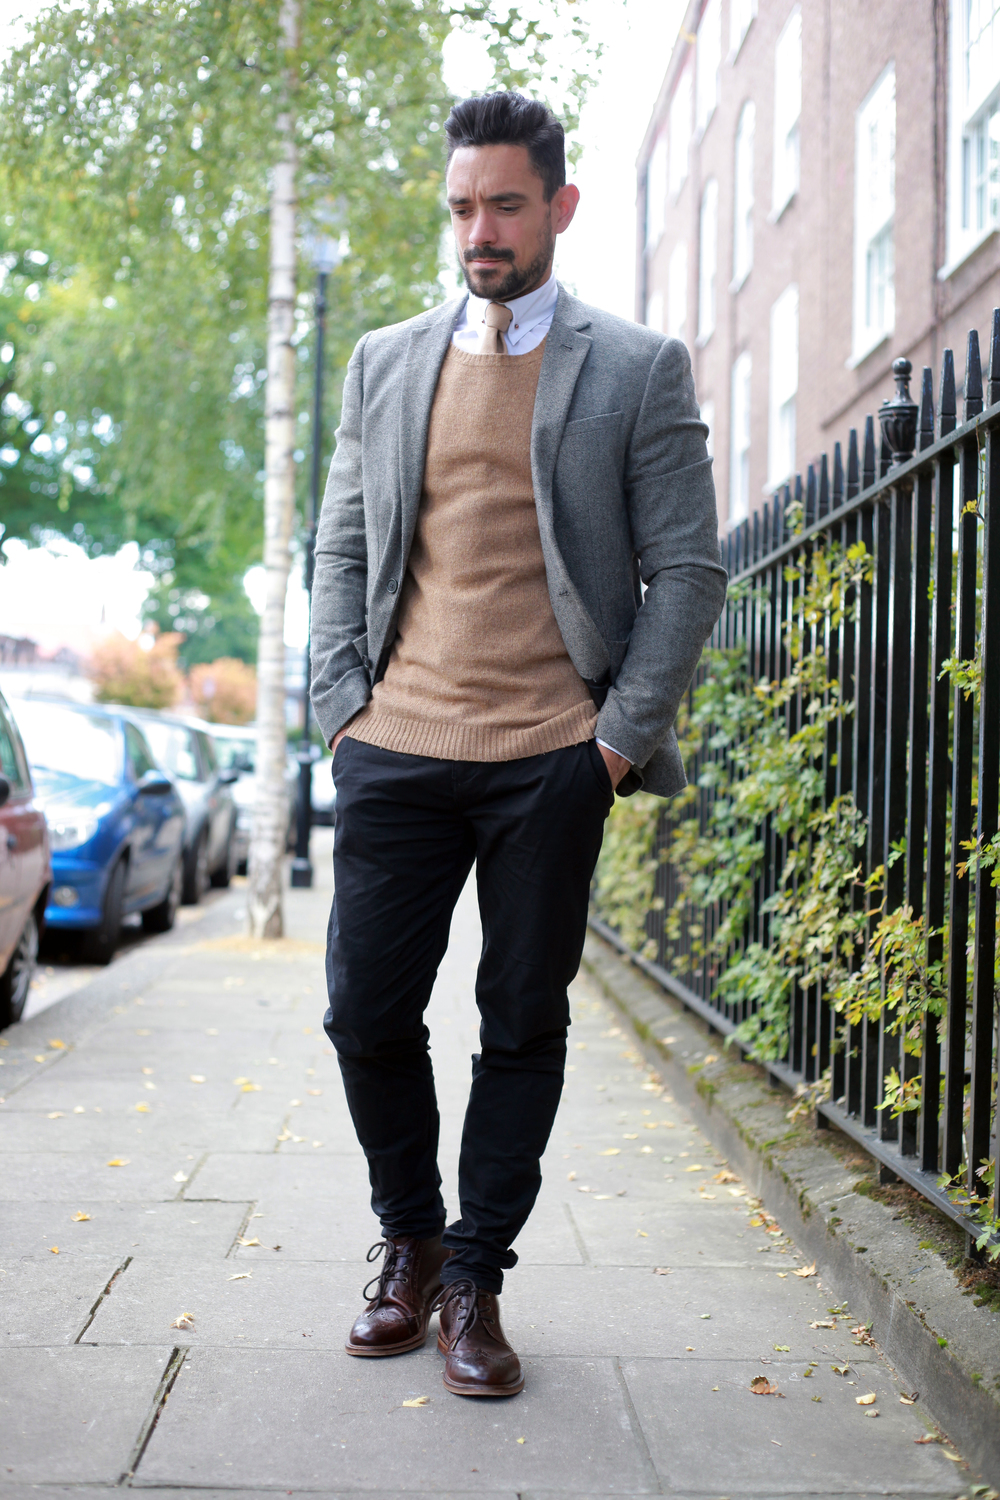 SMART CASUAL WORKWEAR FOR AUTUMN — MEN'S STYLE BLOG